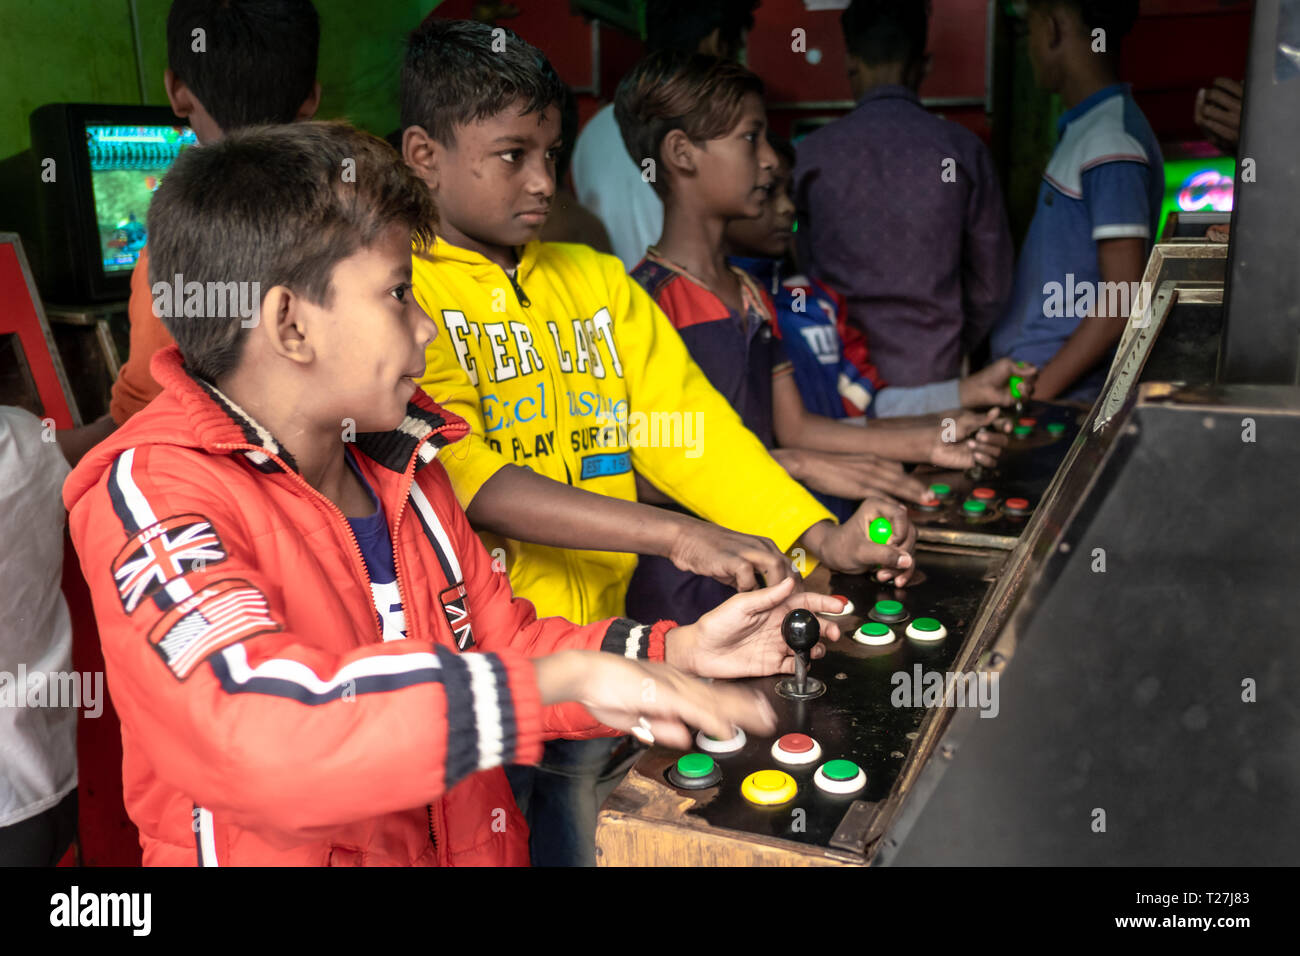 Boys play old style arcade video games in Geneva Camp, stranded Pakistanis enclave in Dhaka, Bangladesh. Stock Photo